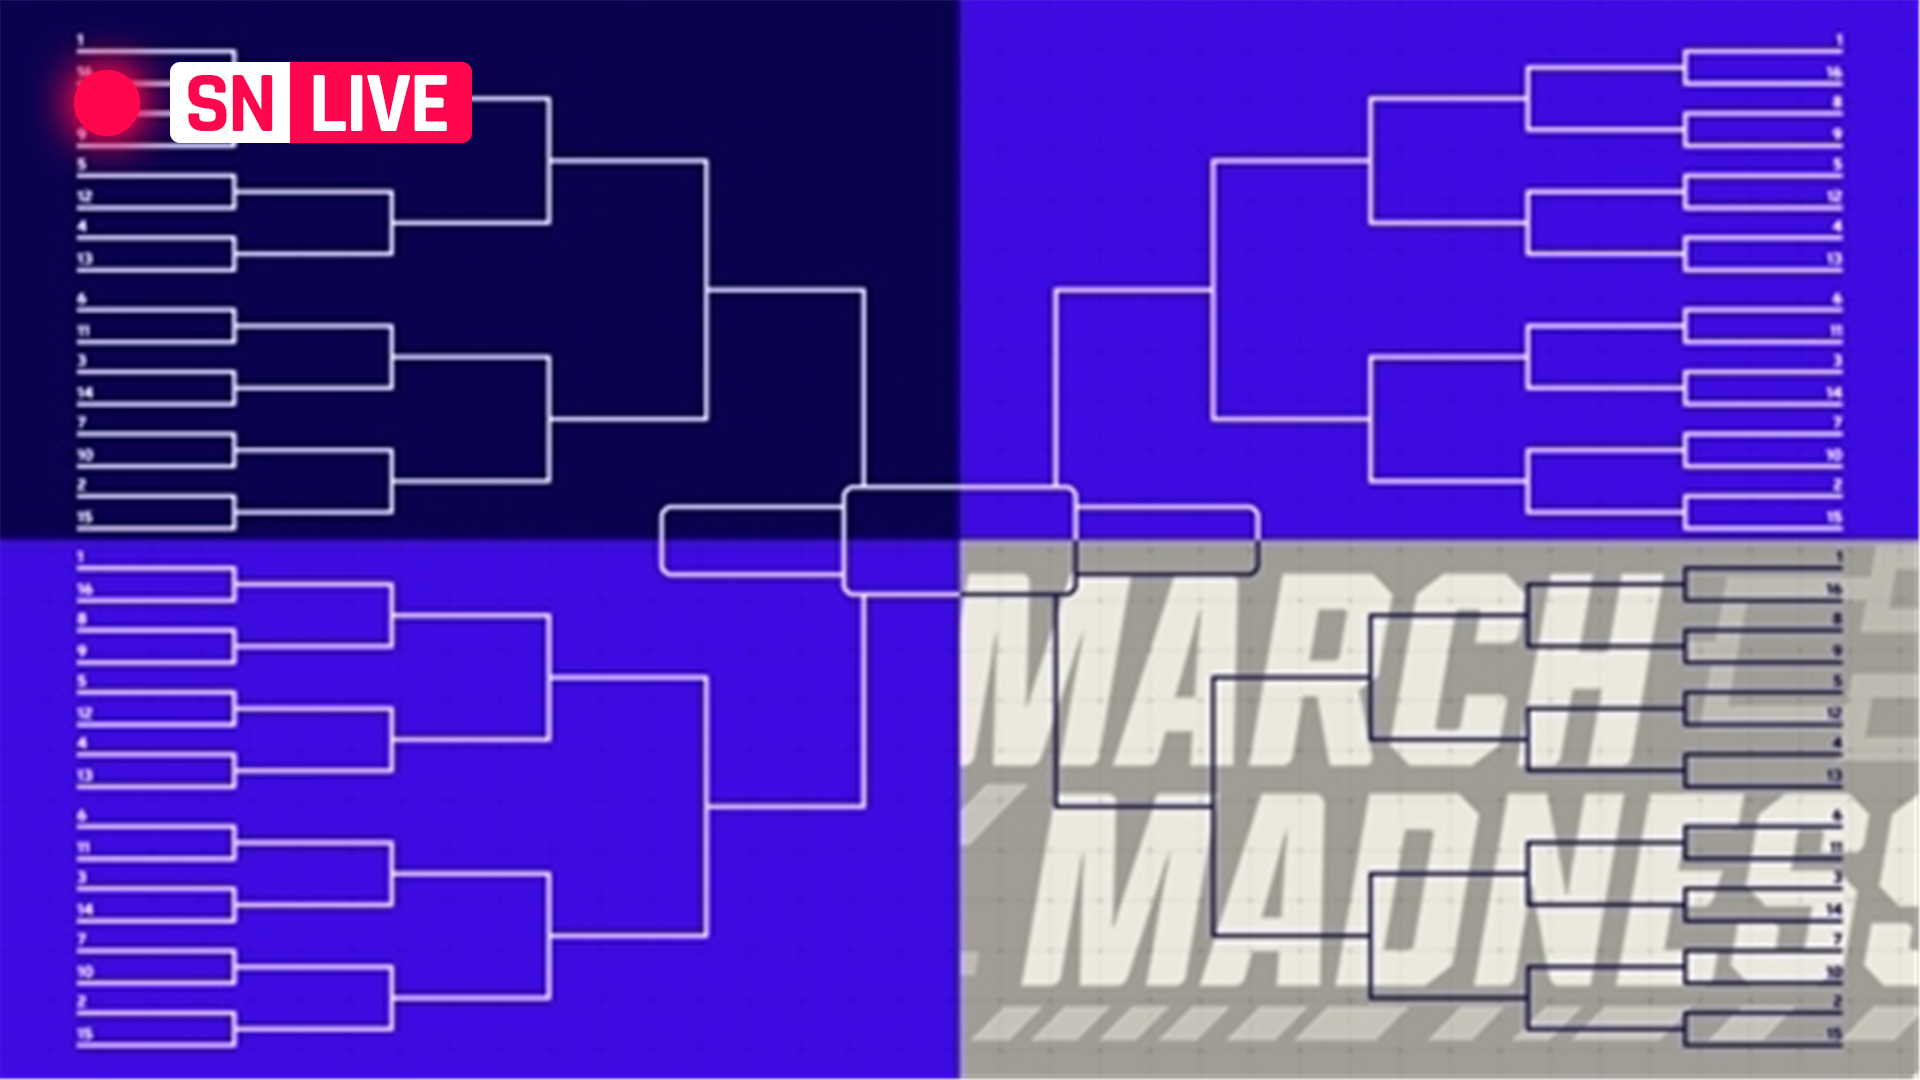 March Madness 2021 scores, results, highlights from Sunday's Round 2